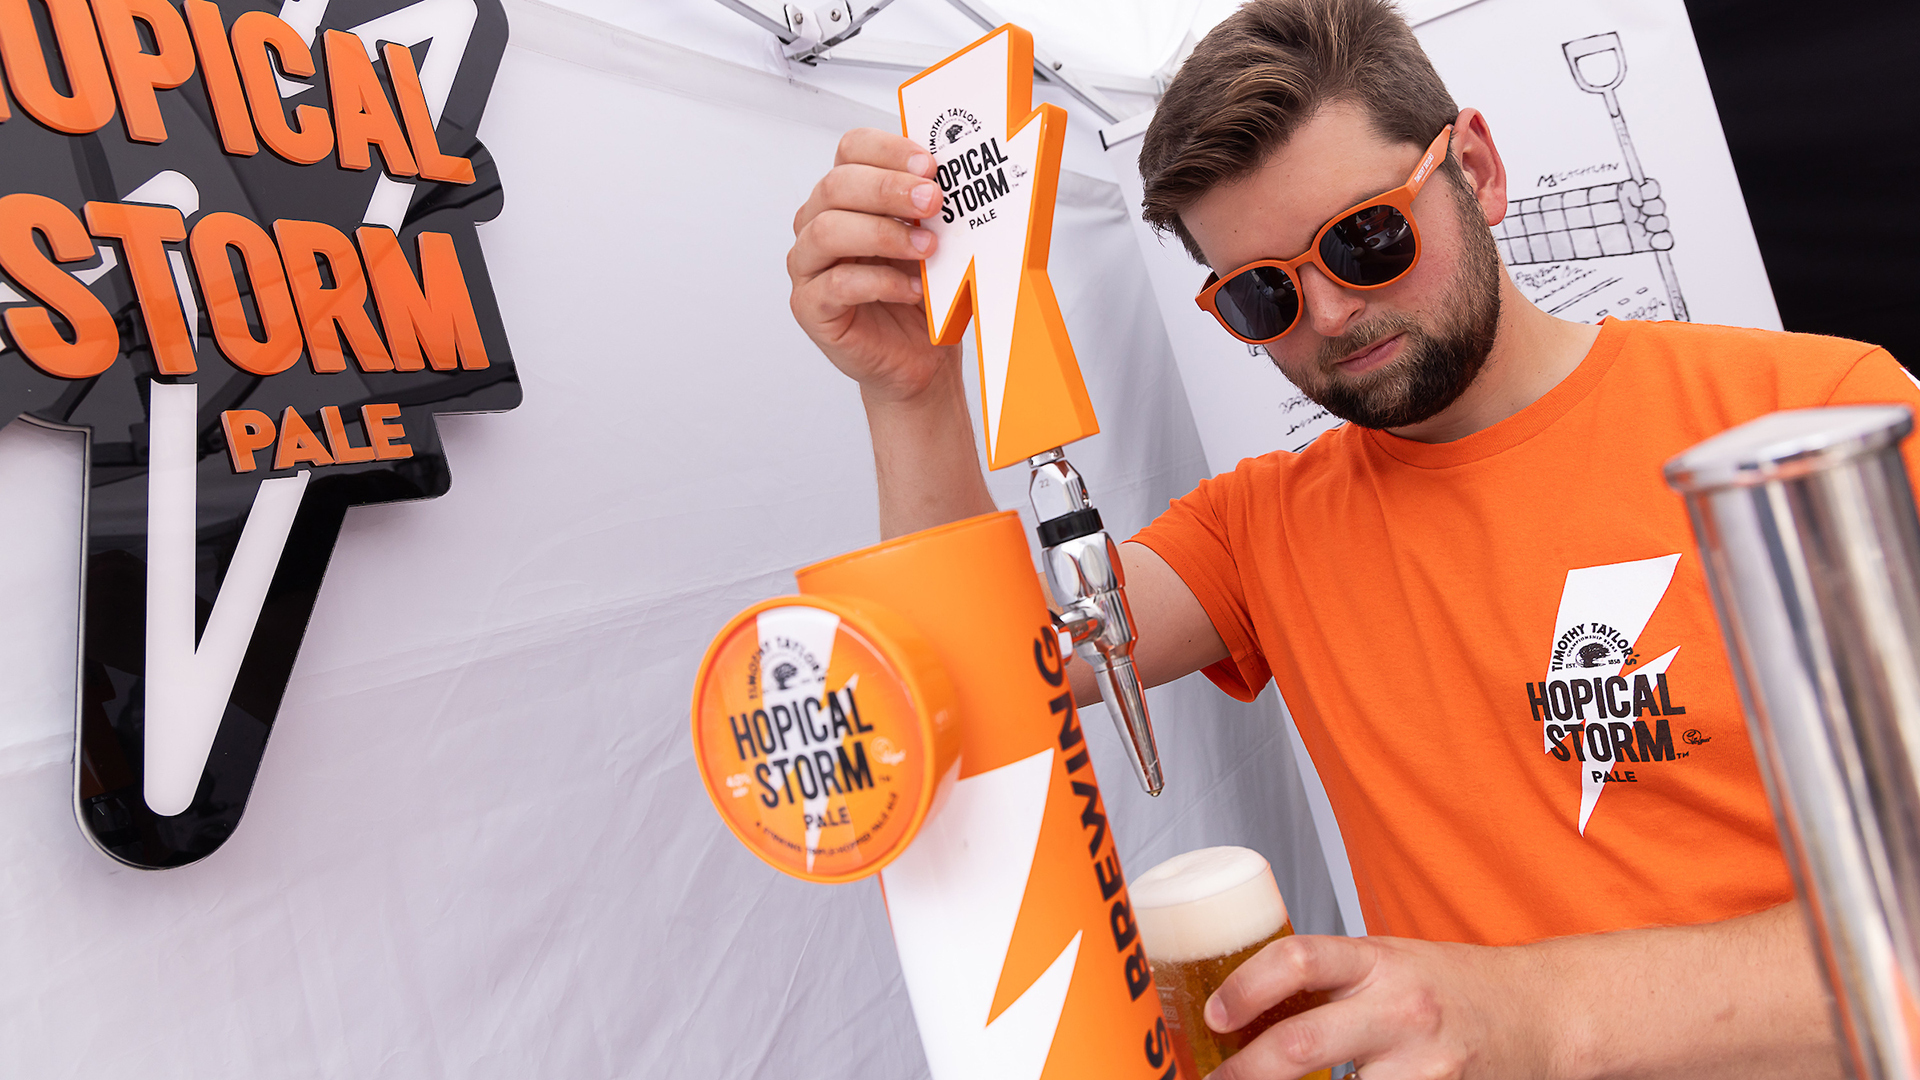 Person in orange t-shirt with a lightning logo and the words 'Hopical Storm Pale' overlayed. Person is pulling a pint in white tent.